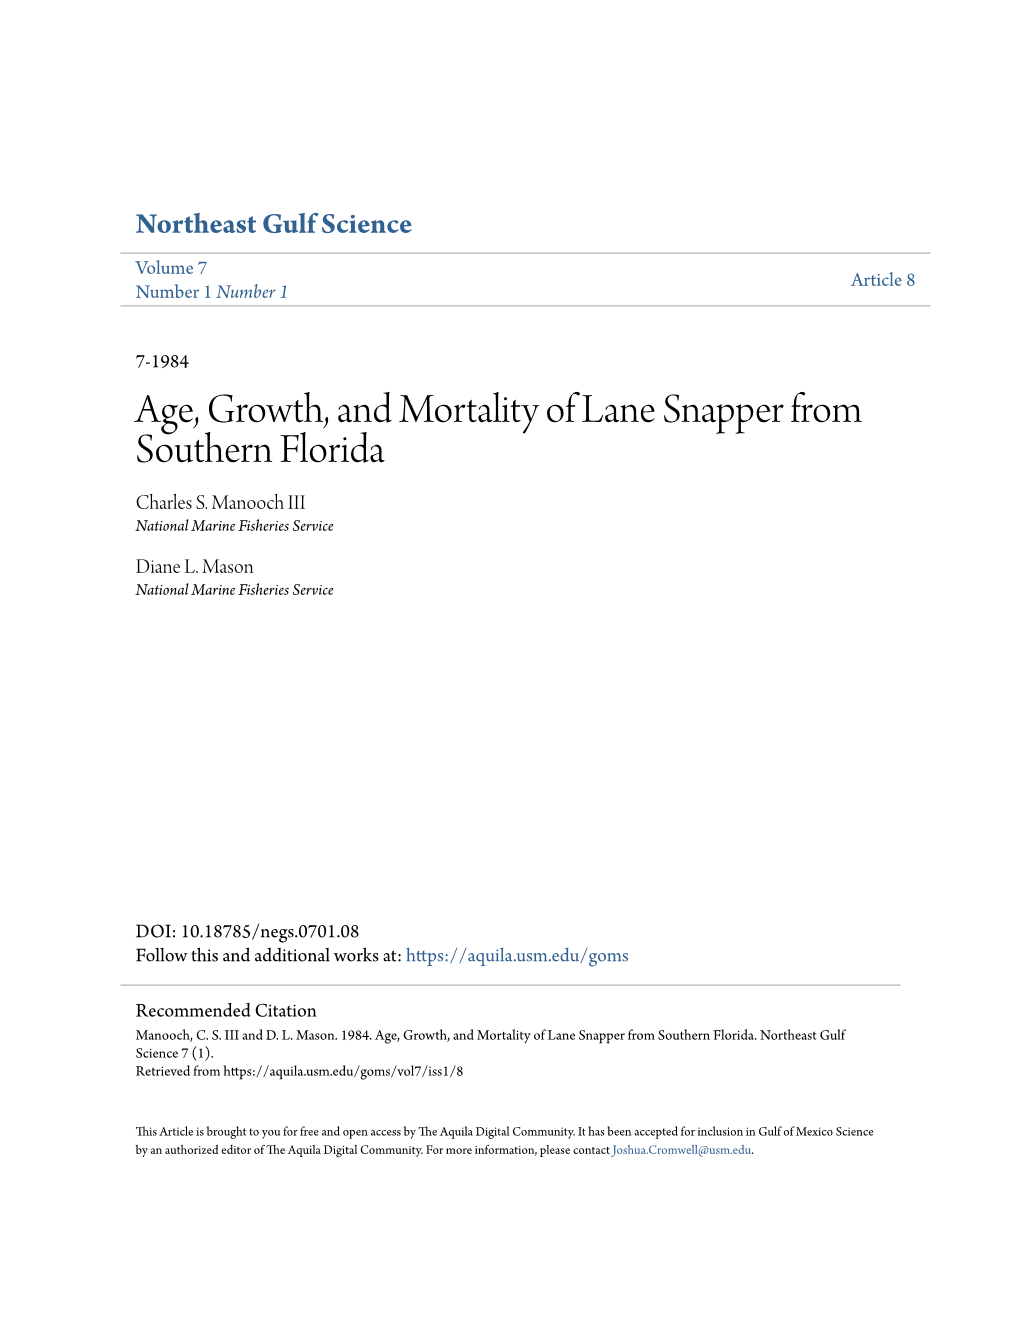 Age, Growth, and Mortality of Lane Snapper from Southern Florida Charles S